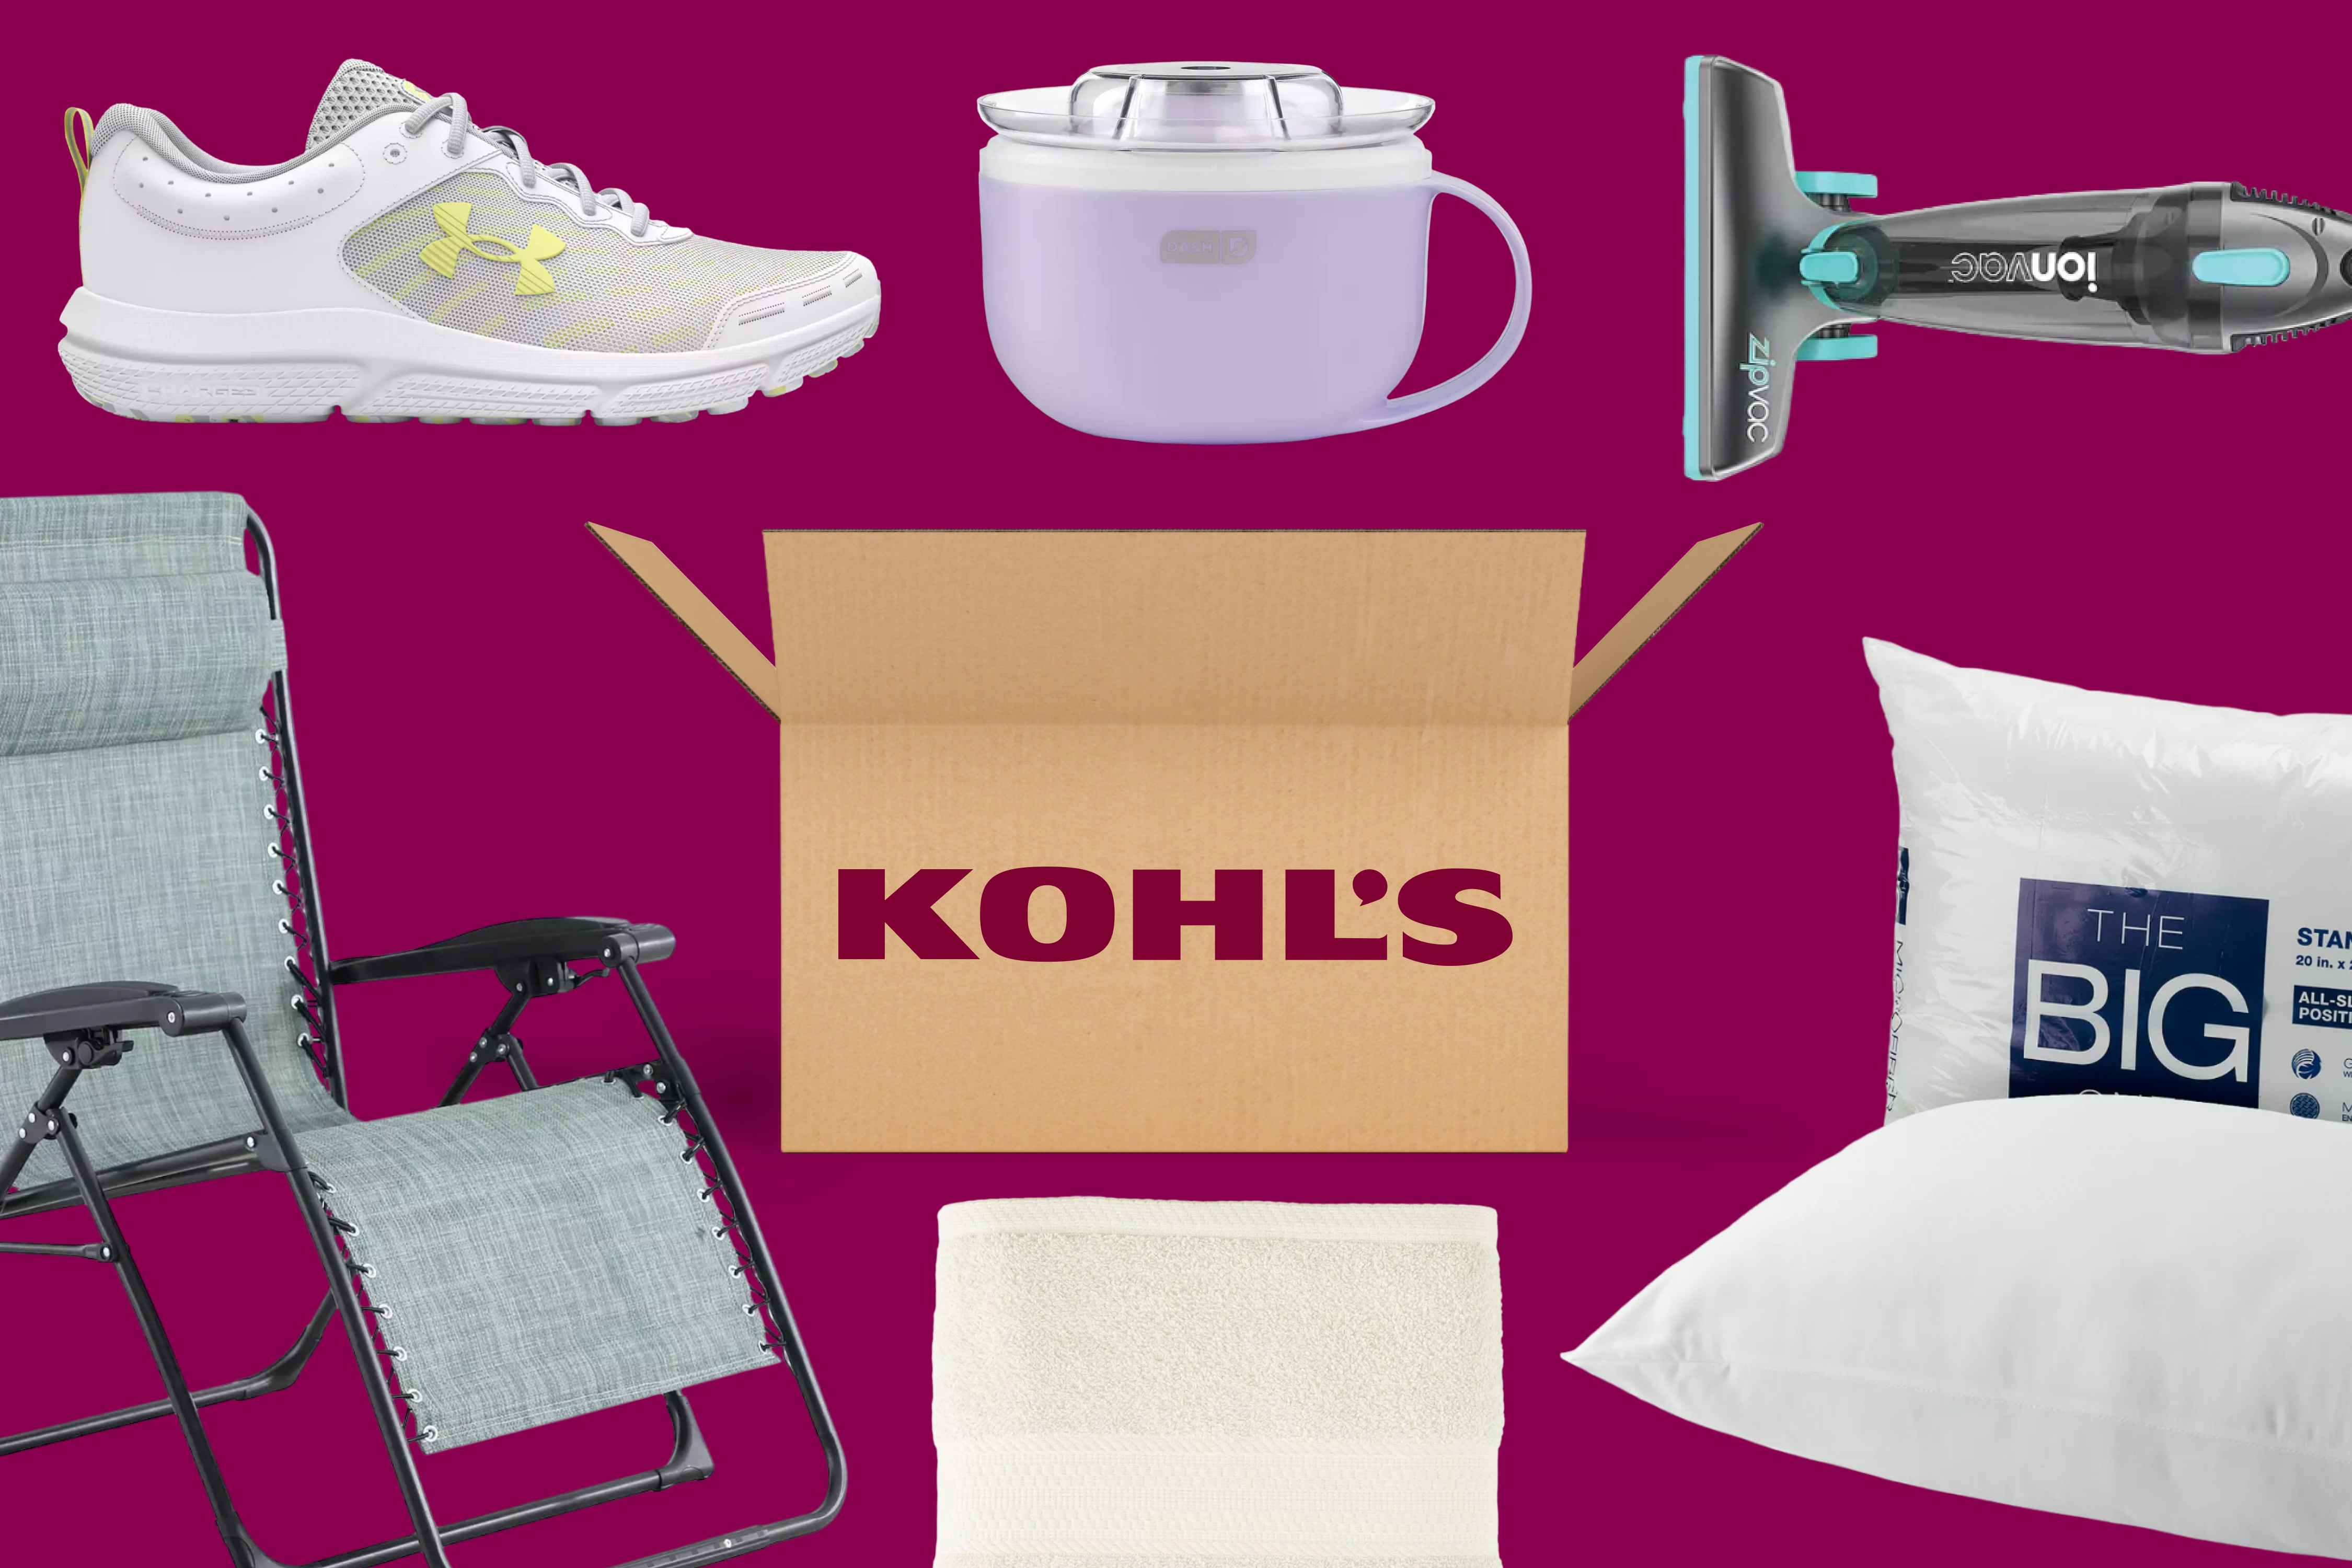 $2.54 Bath Towels, $25 Comforters, $17 Cutlery Set, and More at Kohls